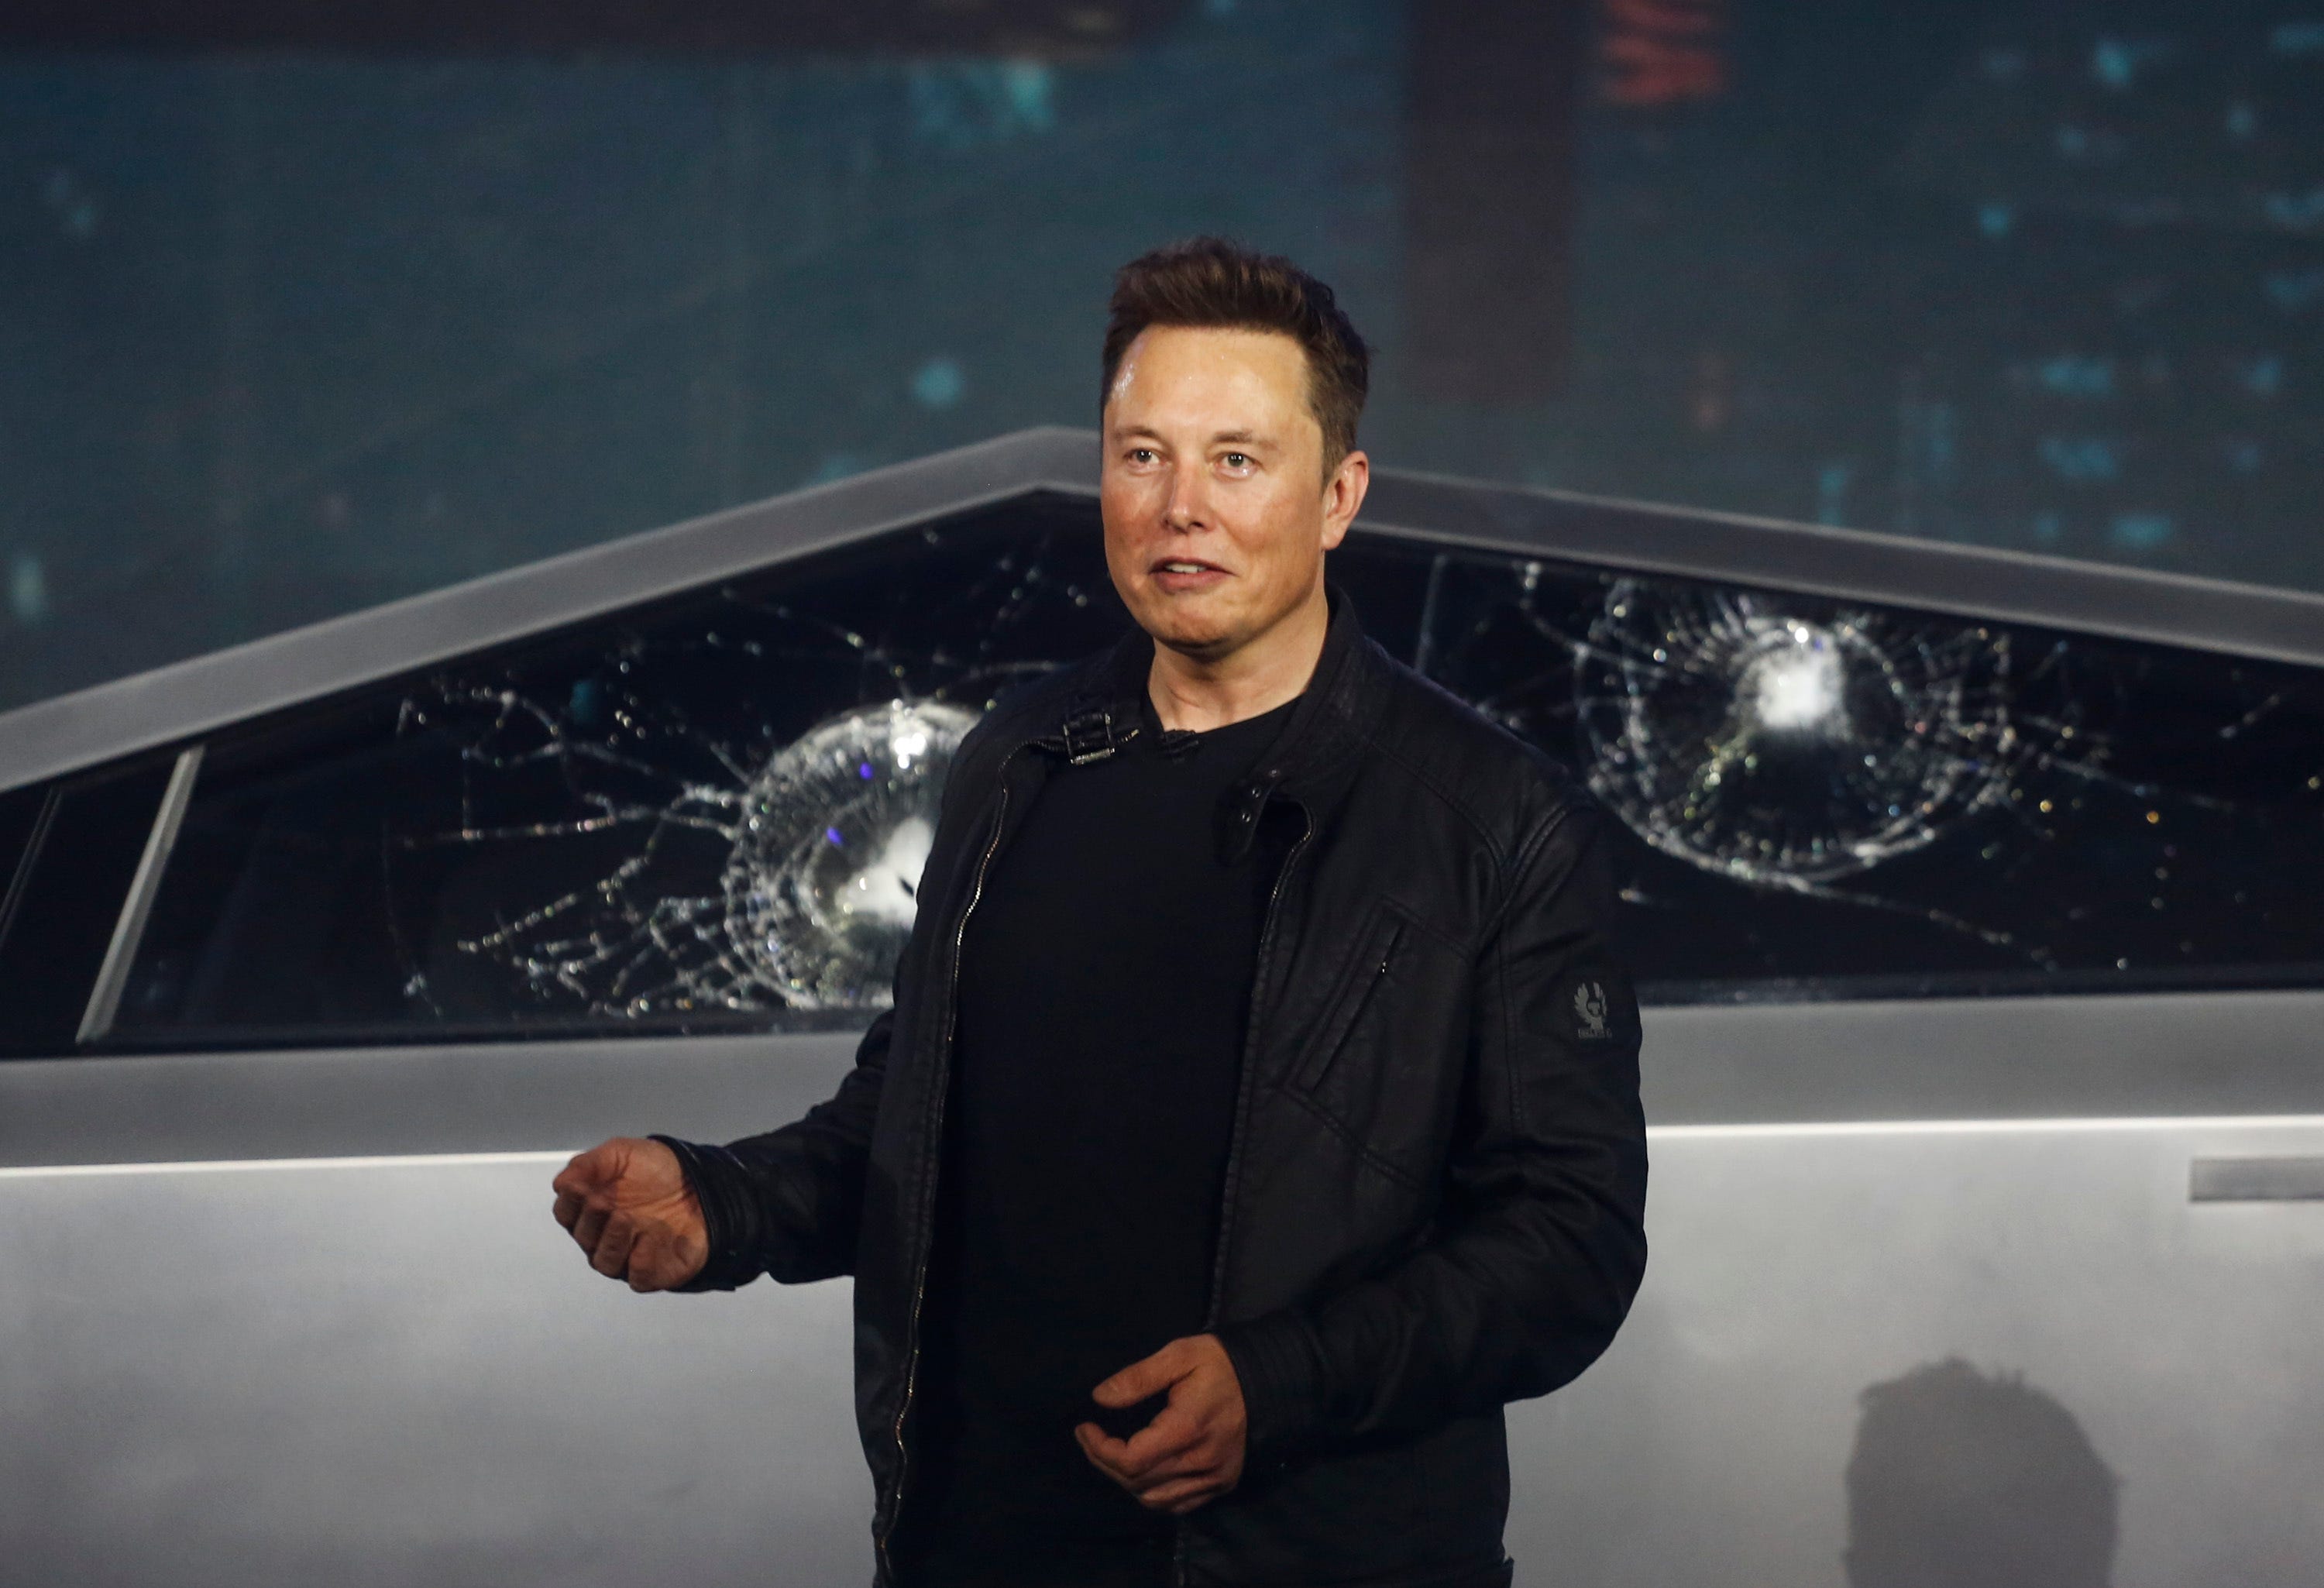 Tesla CEO Elon Musk introduces the Cybertruck at Tesla's design studio Thursday, Nov. 21, 2019, in Hawthorne, Calif. Musk is taking on the workhorse heavy pickup truck market with his latest electric vehicle.